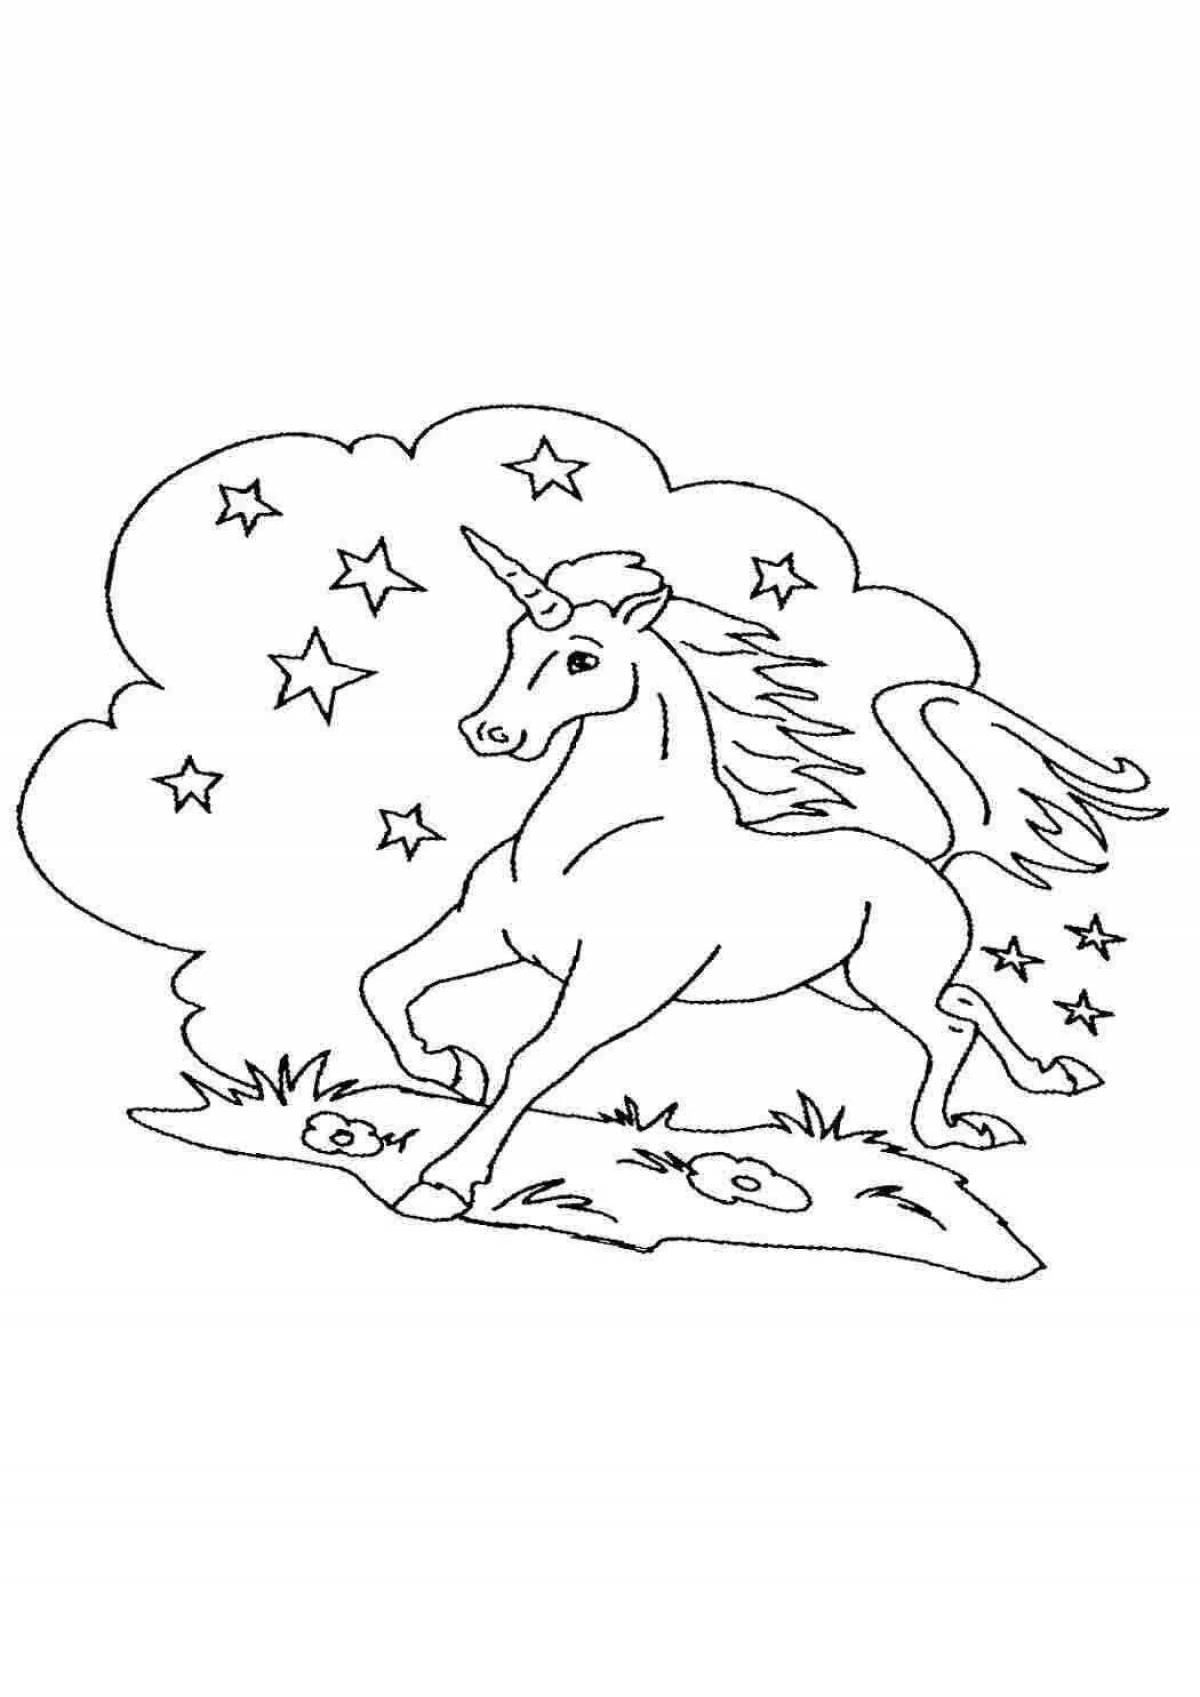 Adorable unicorn coloring page